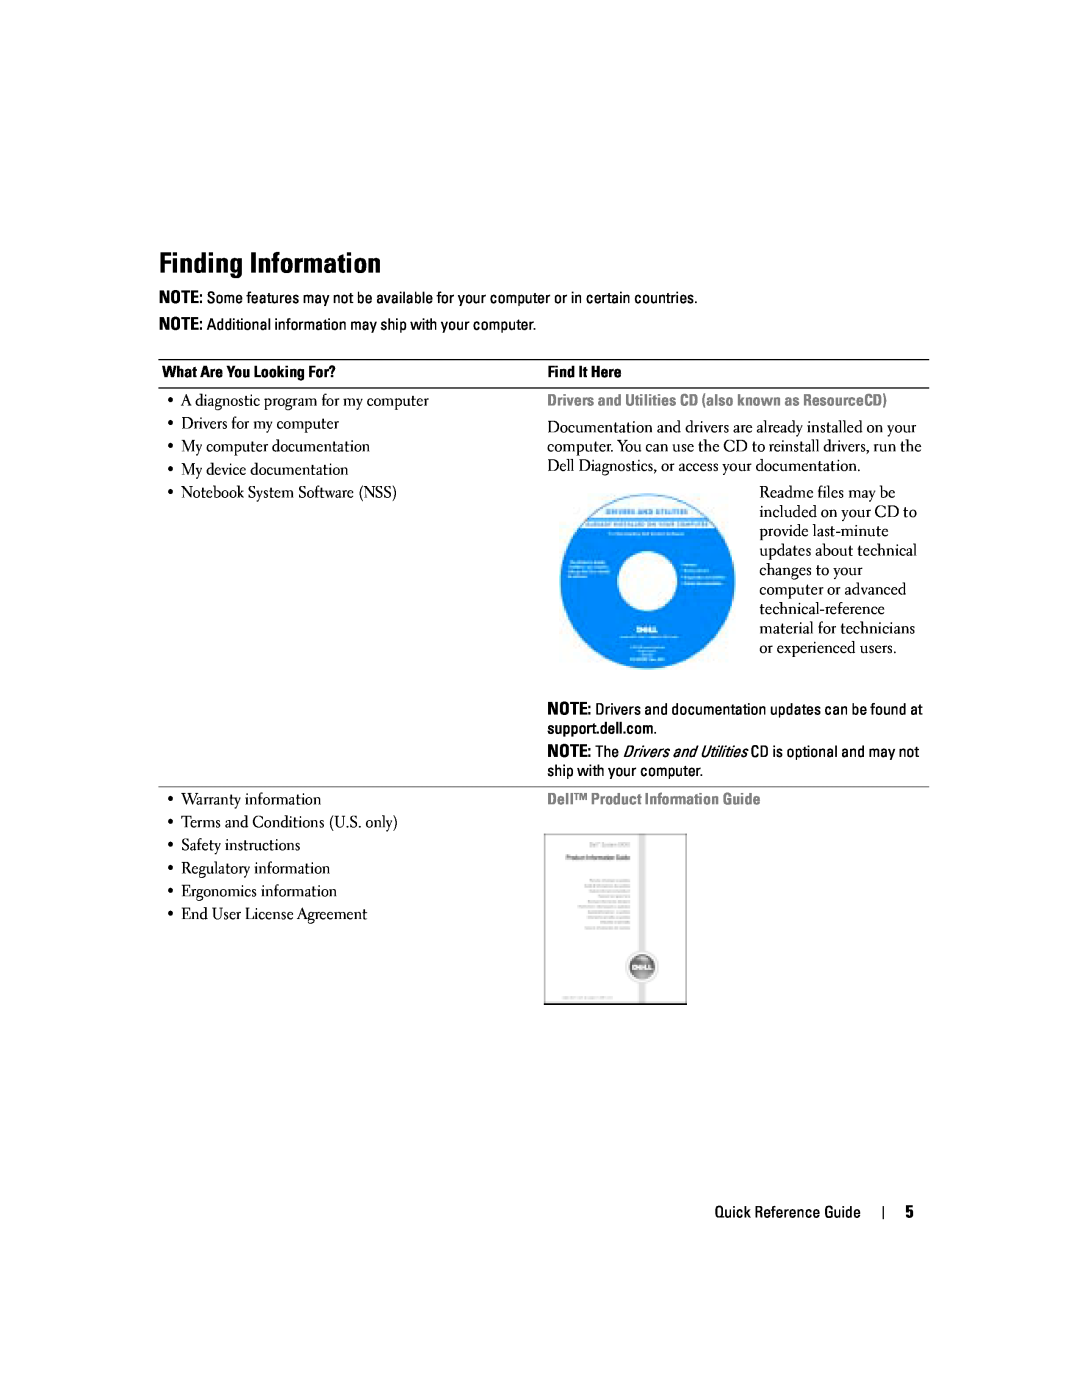 Dell PP06S manual Finding Information, Dell Product Information Guide 